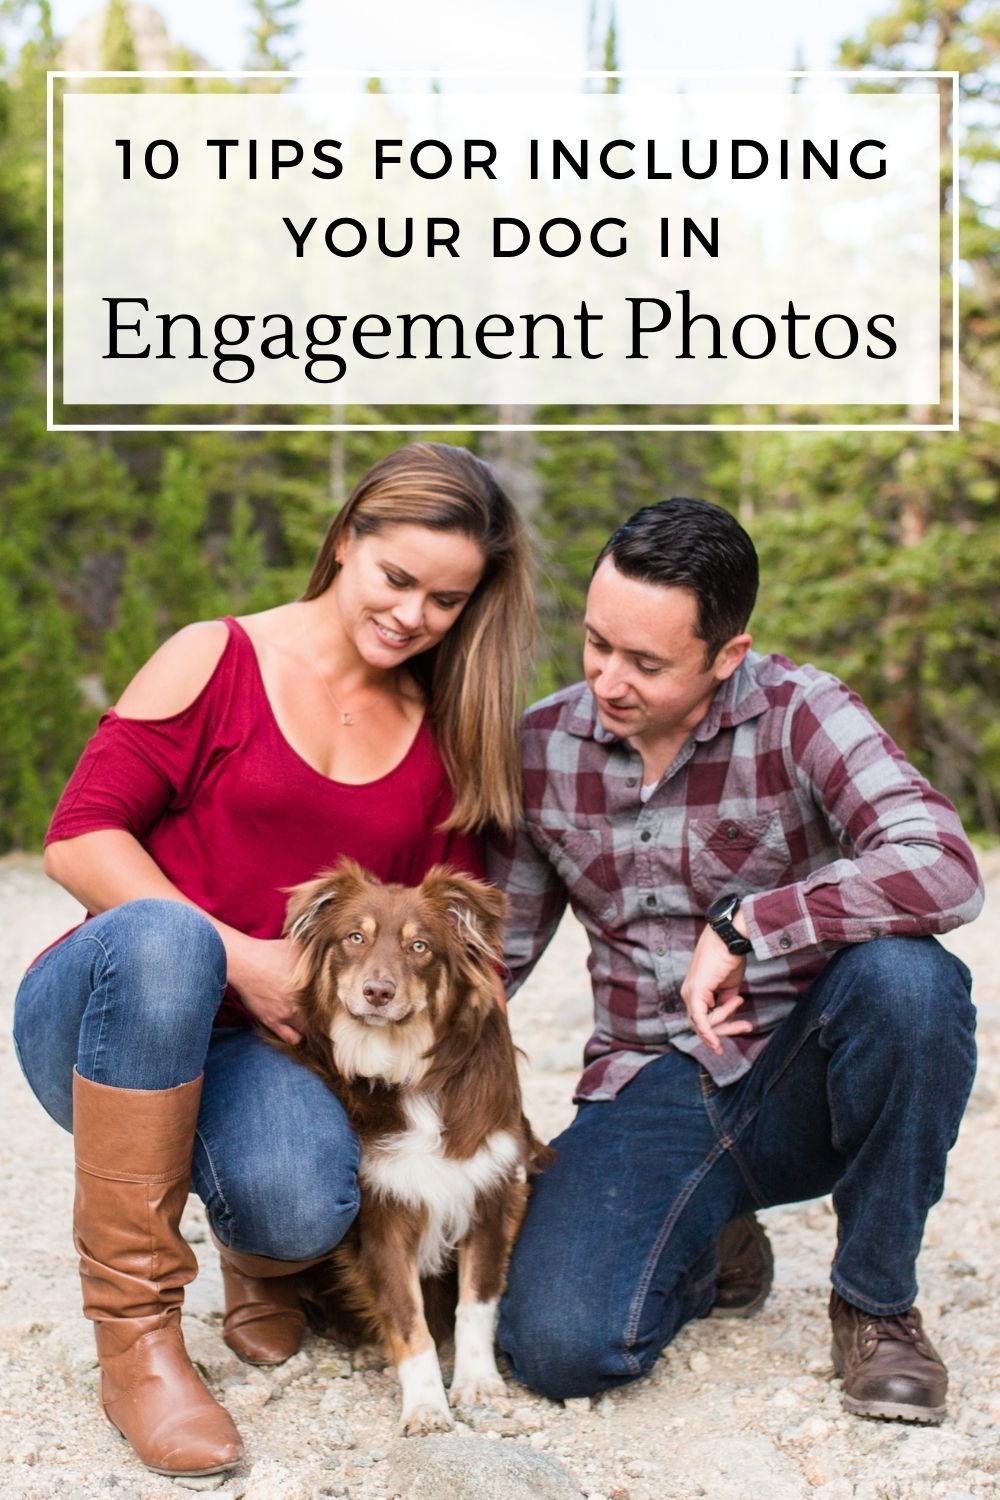 Tips for dog engagement photos 3.jpg